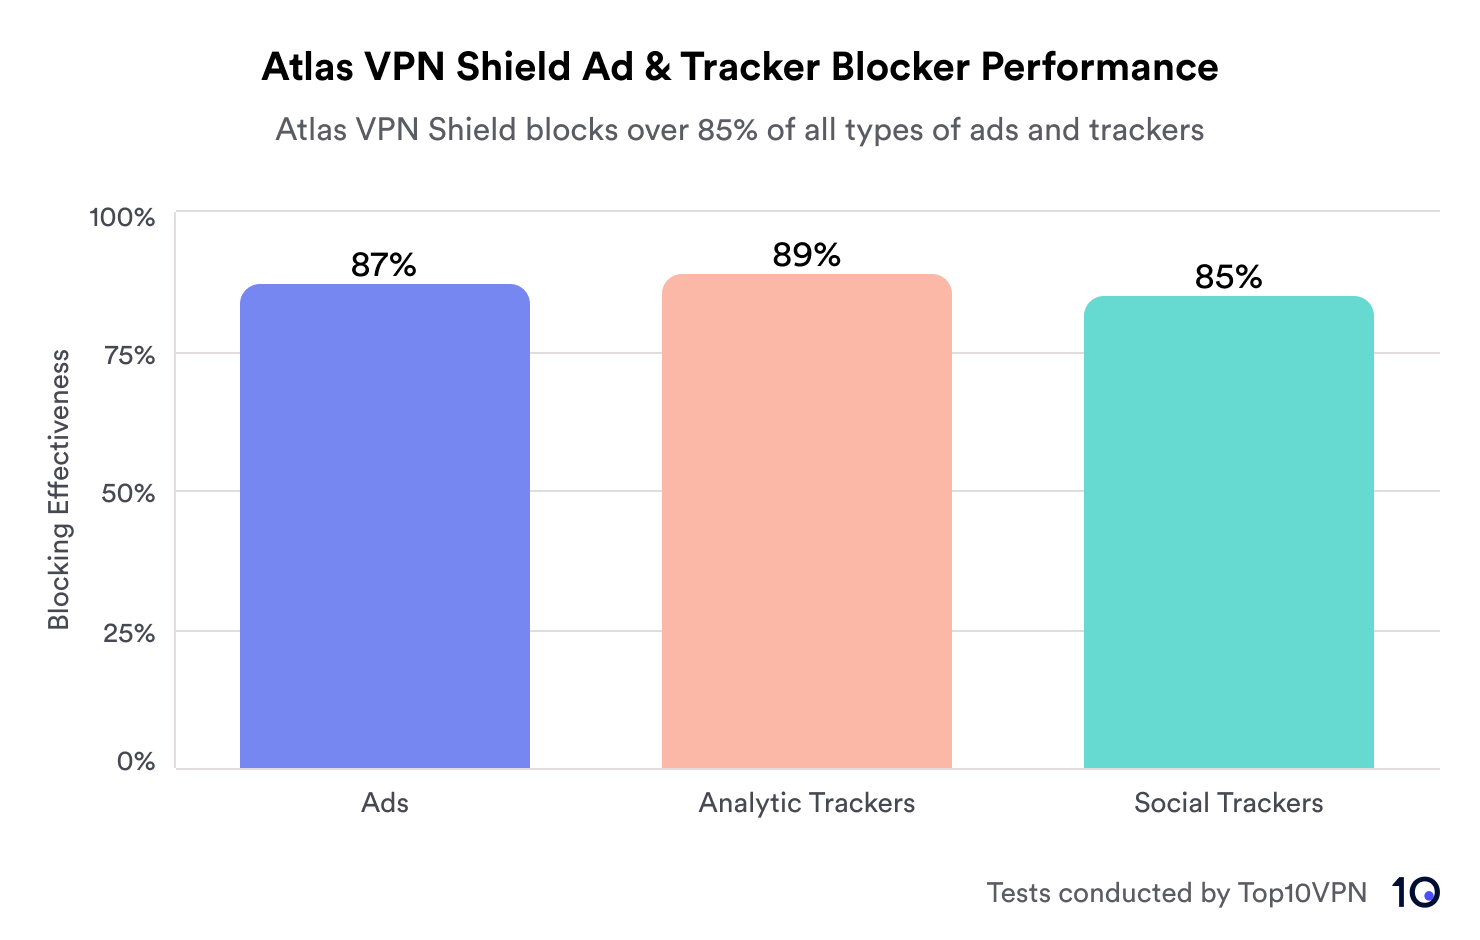 Bar chart of Atlas VPN Shield performance showing 87% effectiveness for ads, 89% for analytic trackers, and 85% for social trackers